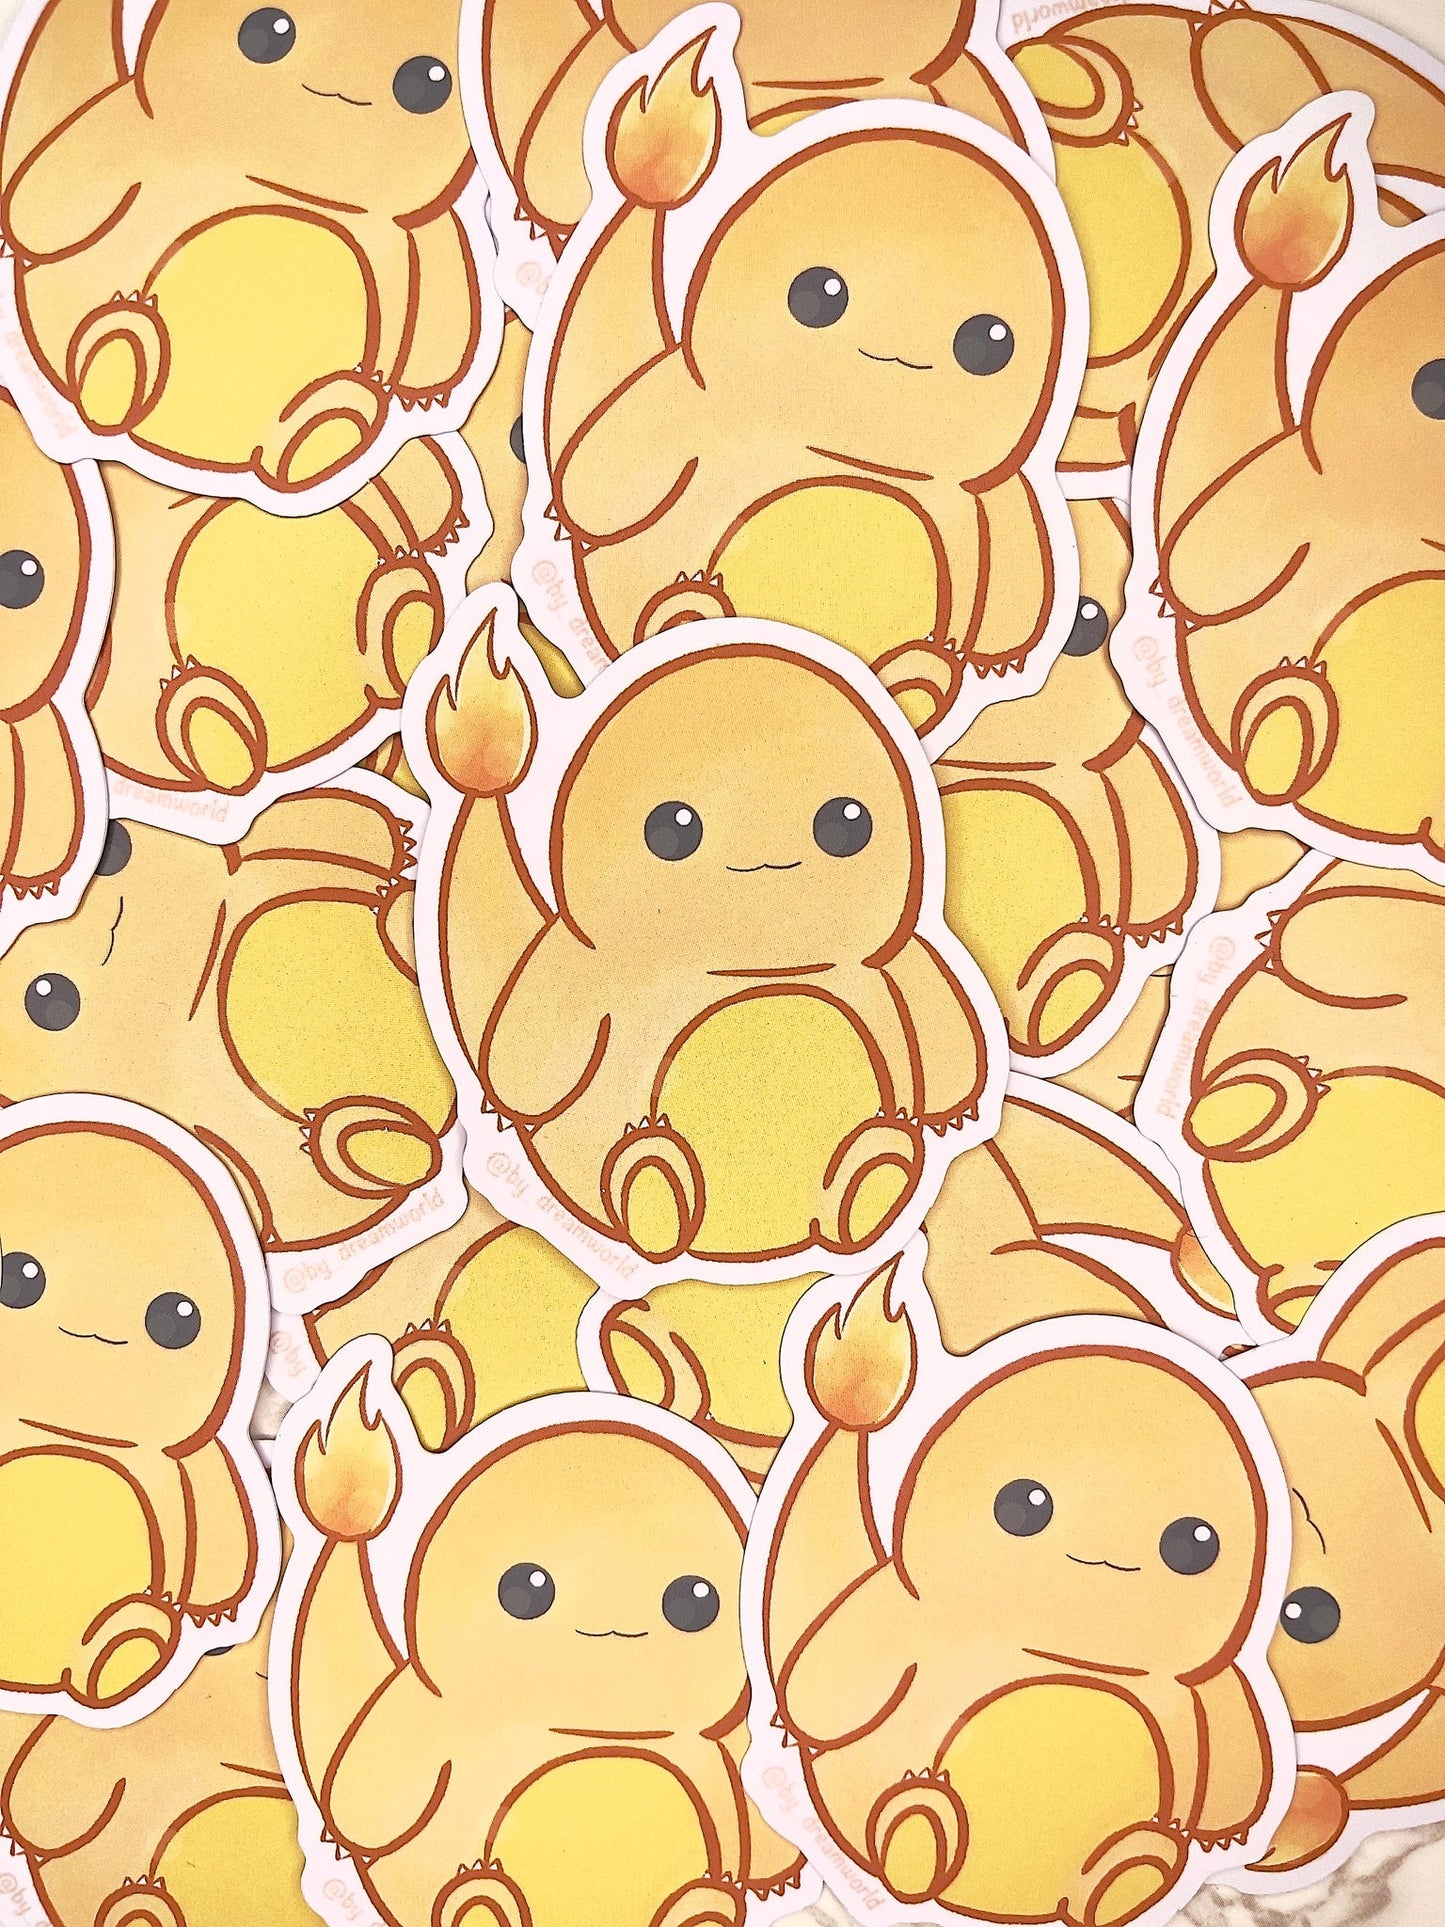 Dream World Chonky Starters Stickers